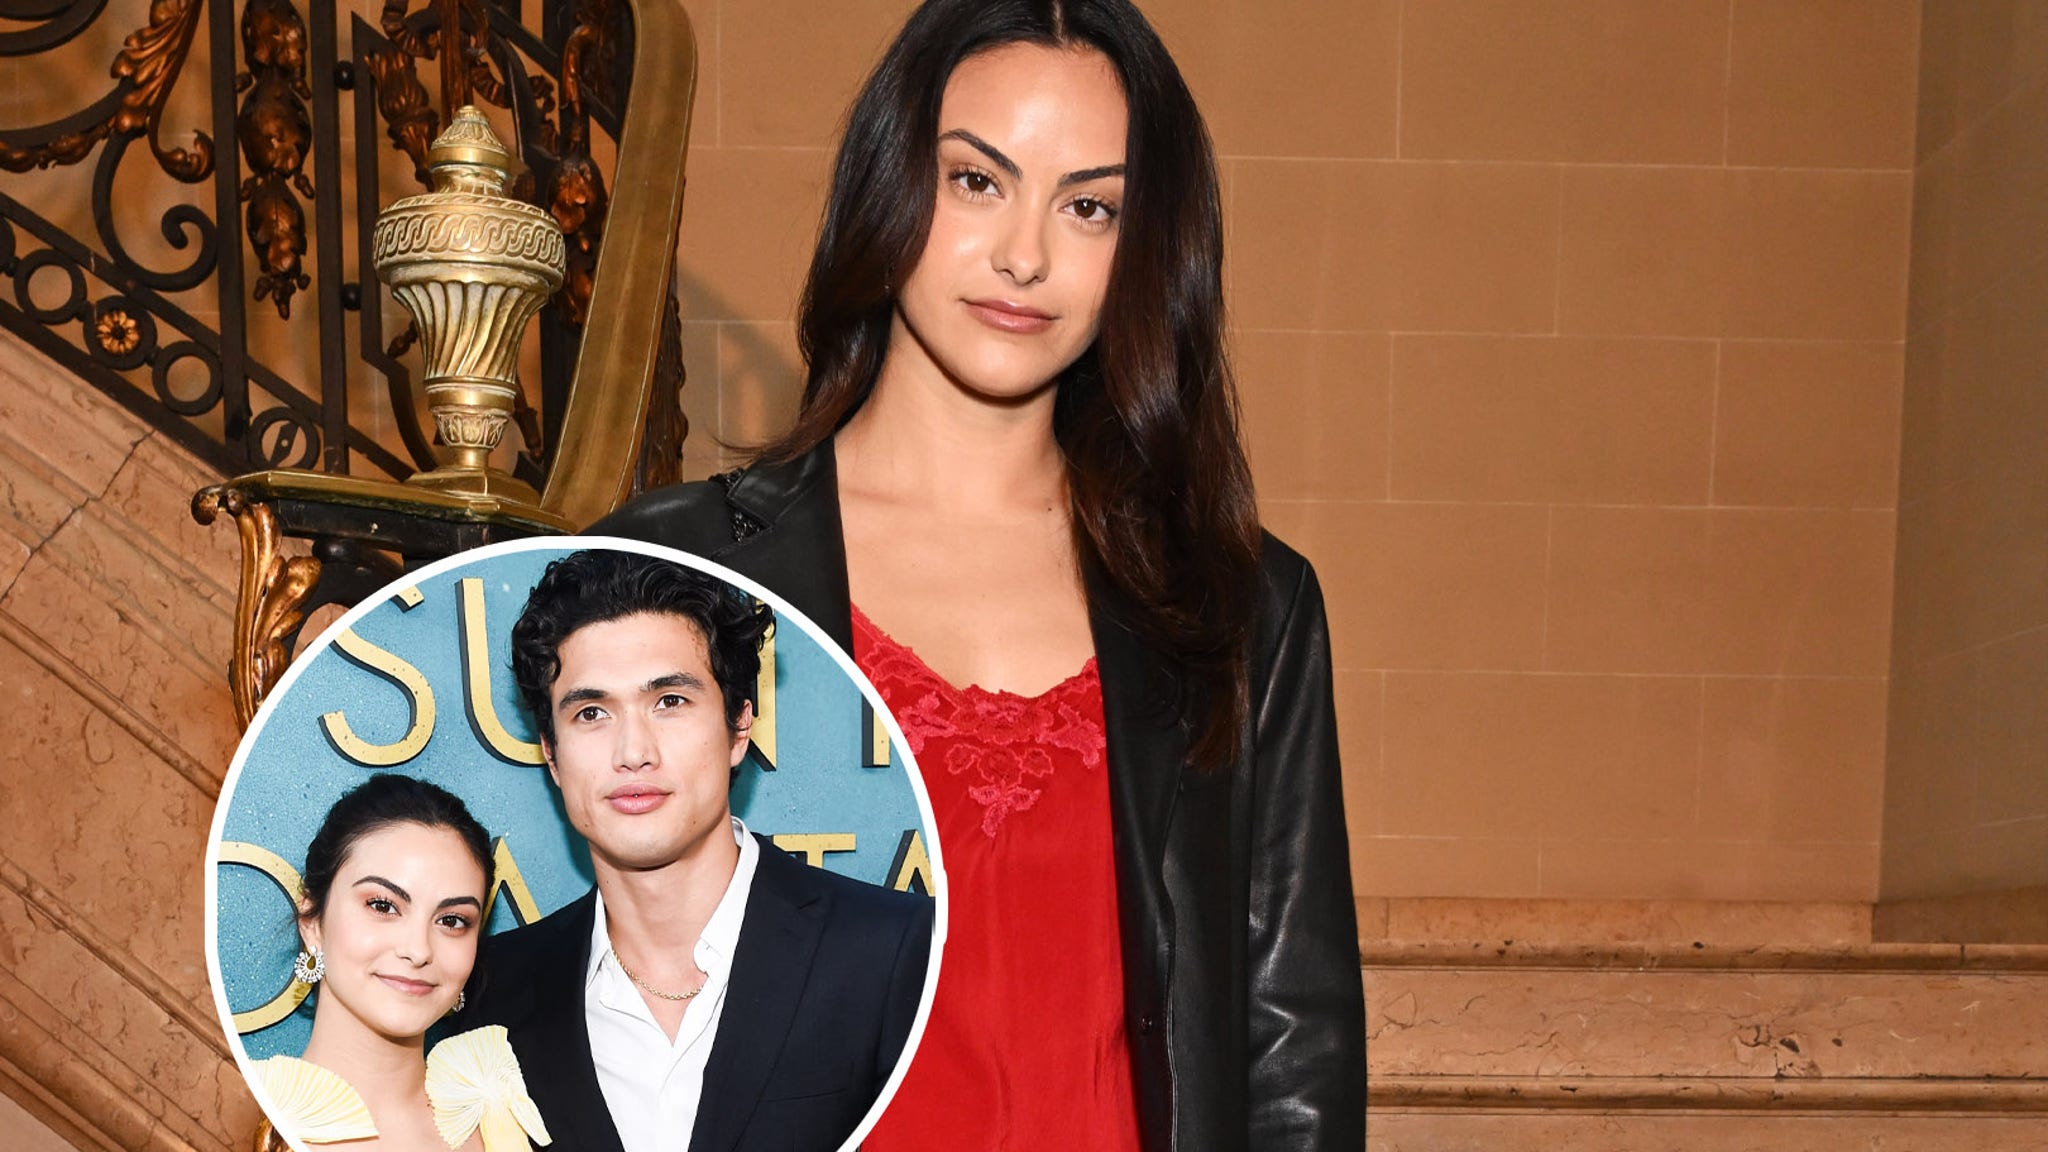 Camila Mendes Opens Up About 'Emotional' Experience Working With Riverdale Costar Charles Melton After Breakup